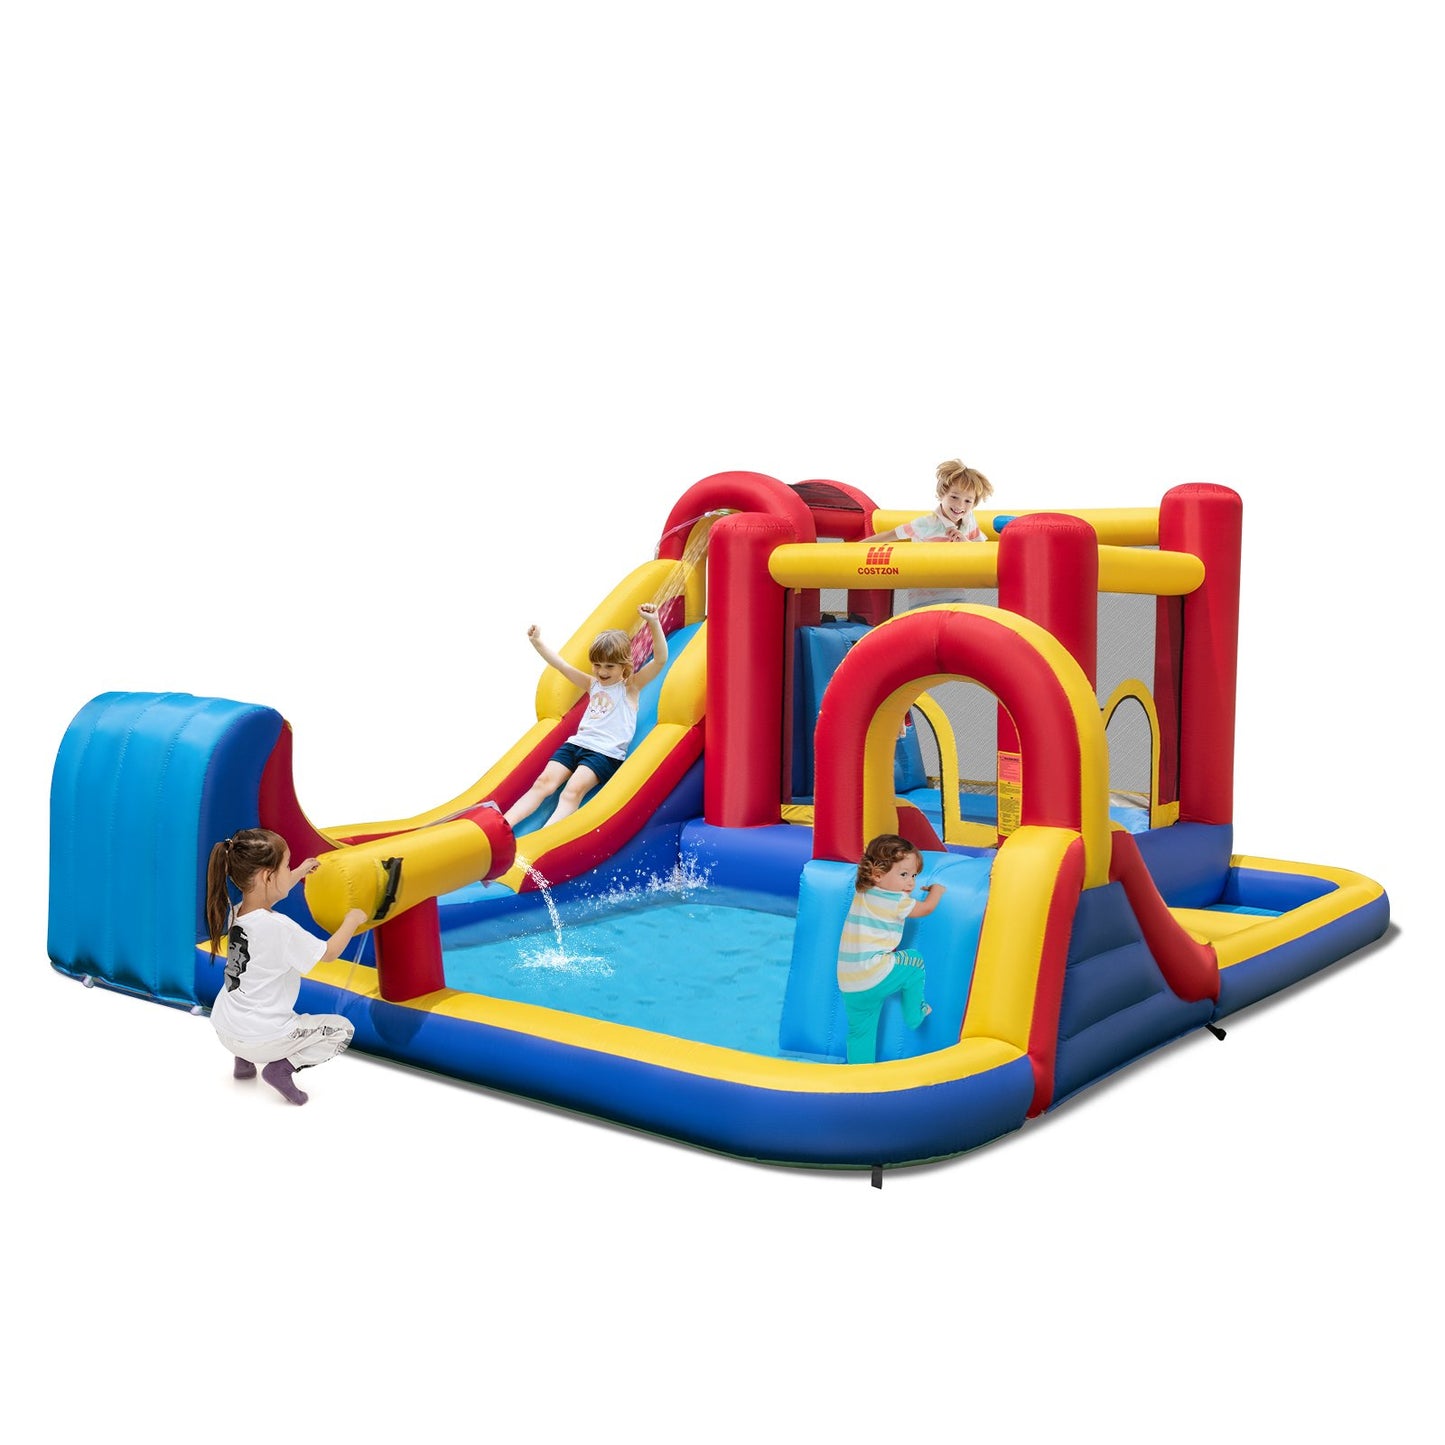 7 in 1 Outdoor Inflatable Bounce House with Water Slides and Splash Pools with 950W Blower, Red